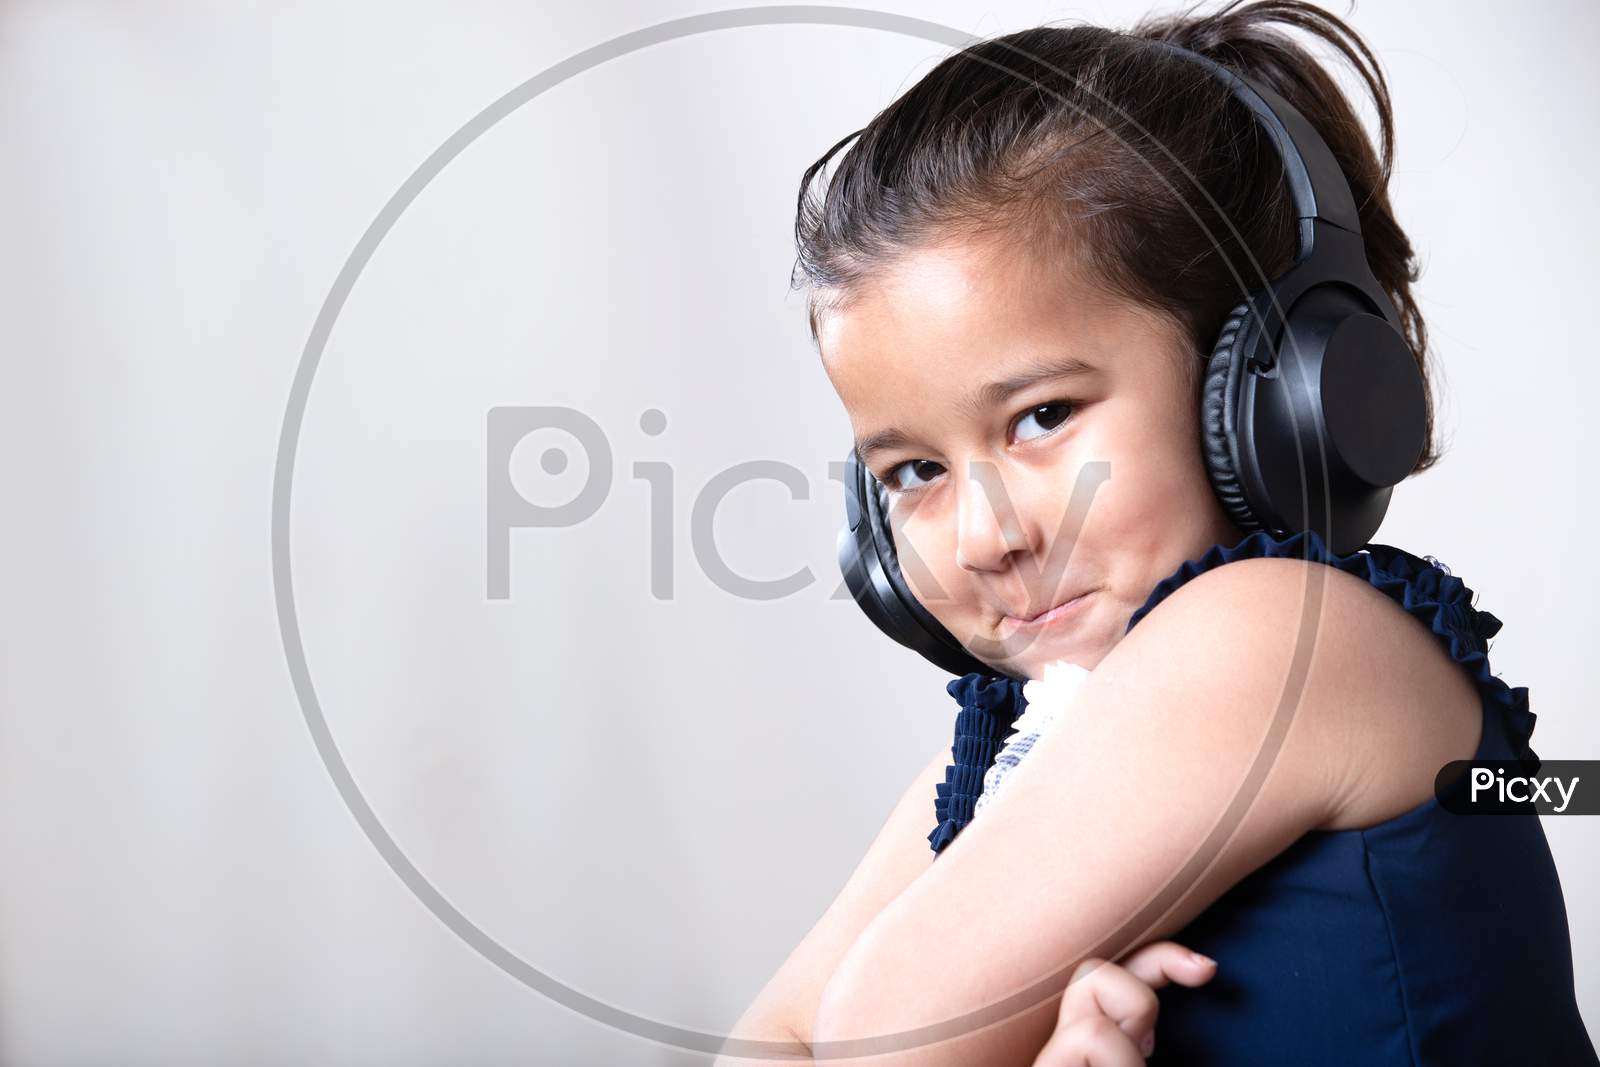 Cute Little Girl With Headphones Giving Cute Expression Toward The Camera